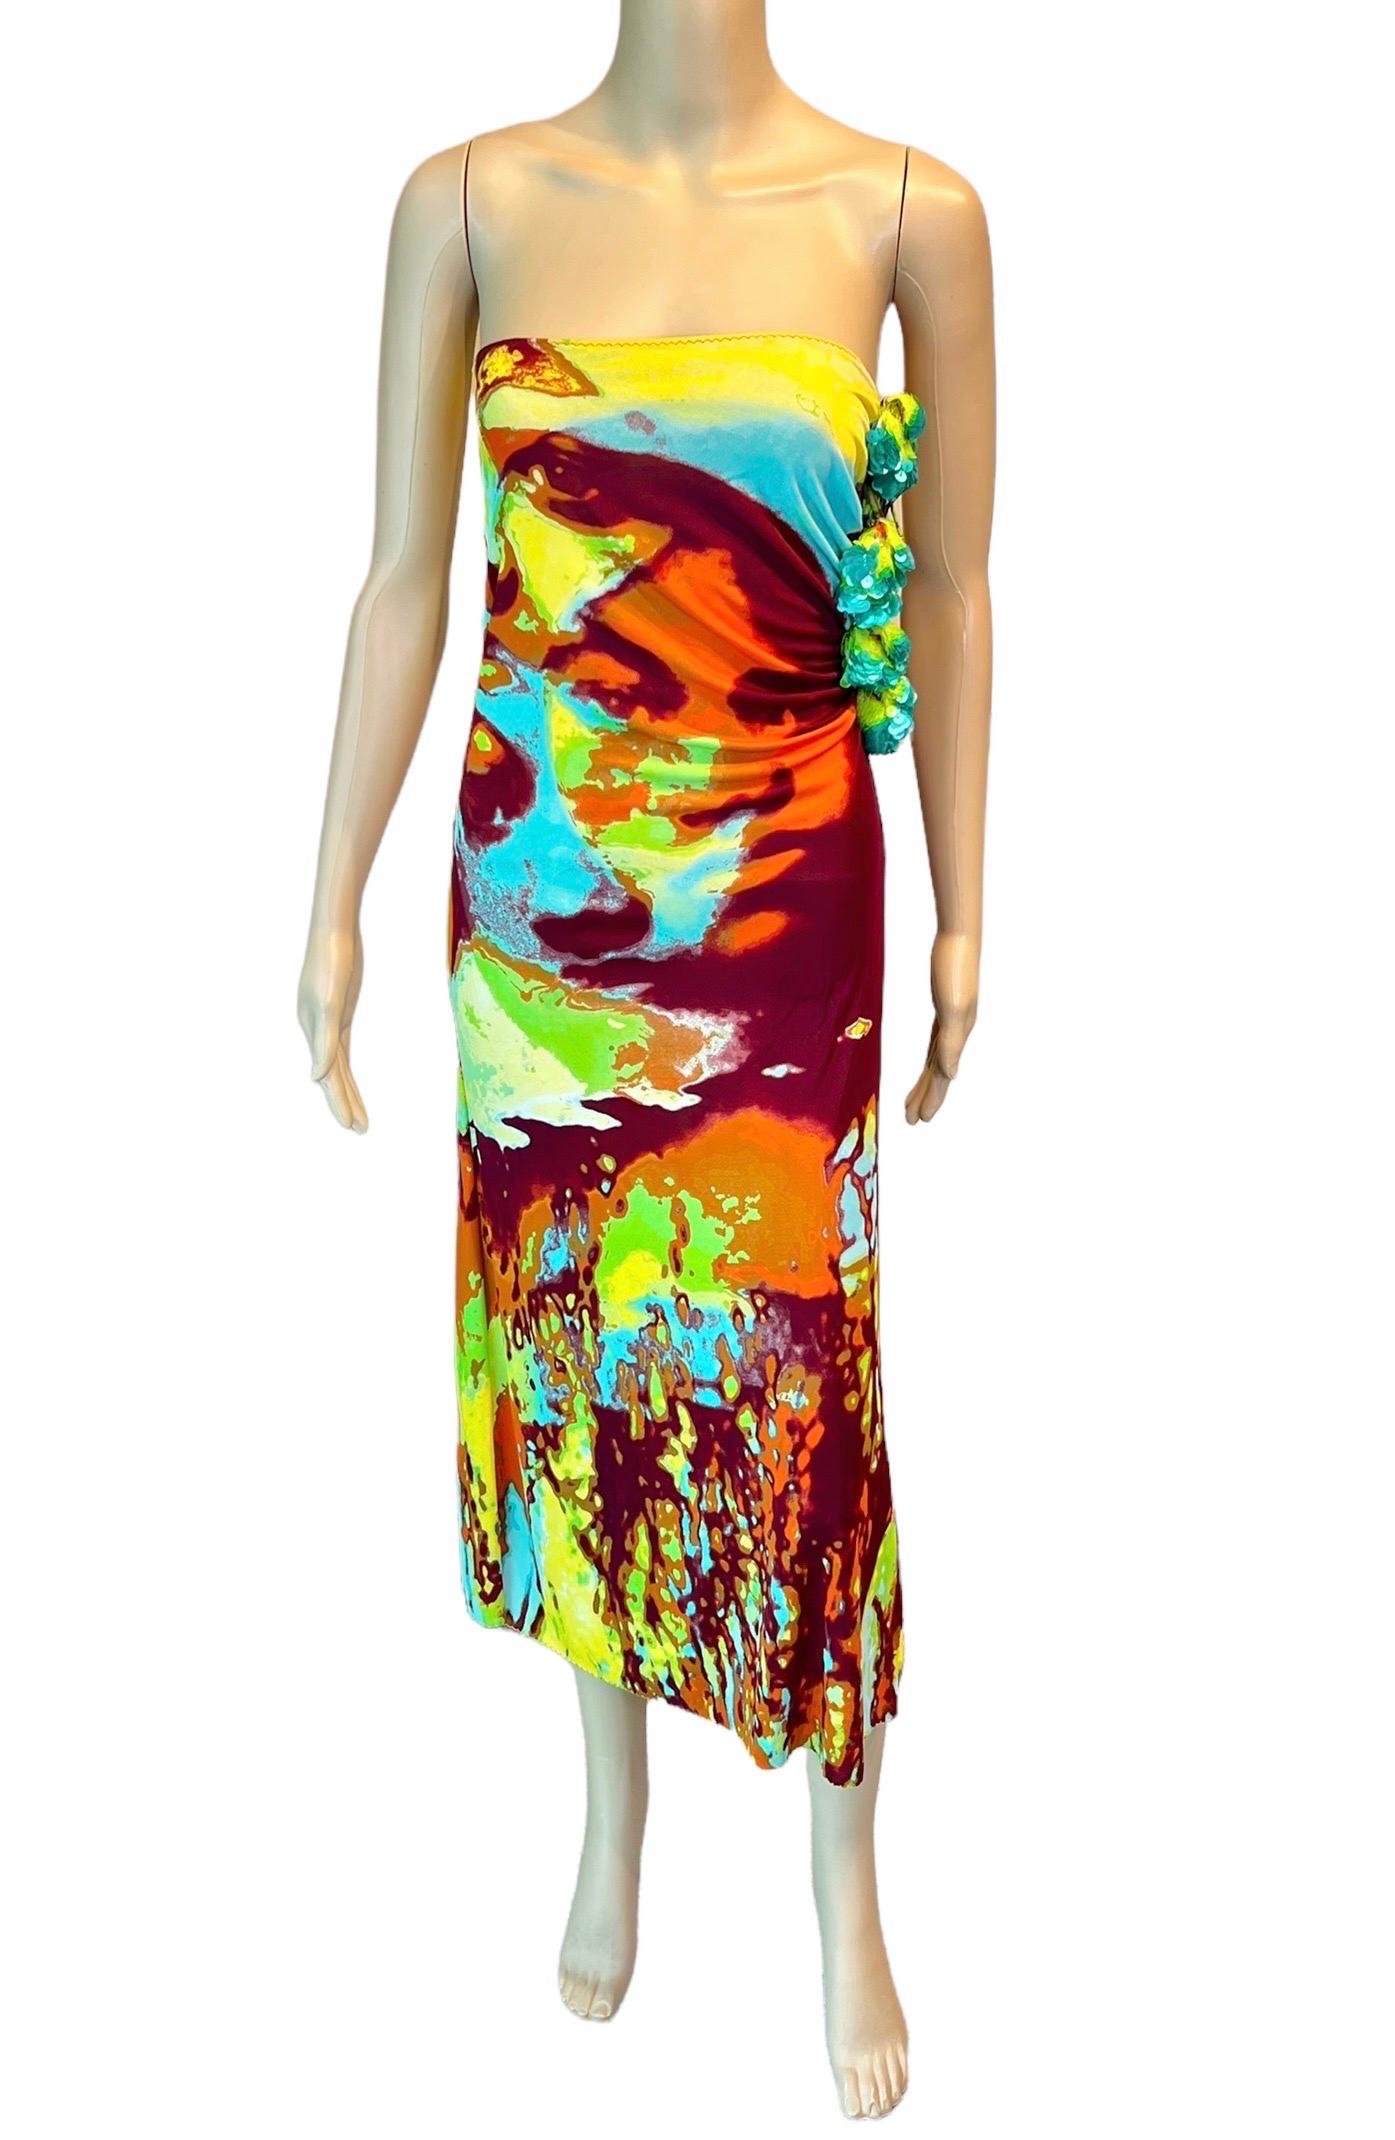 Jean Paul Gaultier S/S 2000 Runway Embellished Psychedelic Print Bodycon Maxi Skirt Dress IT 42

Please note this item can be worn as a dress or a skirt based on preference. 

